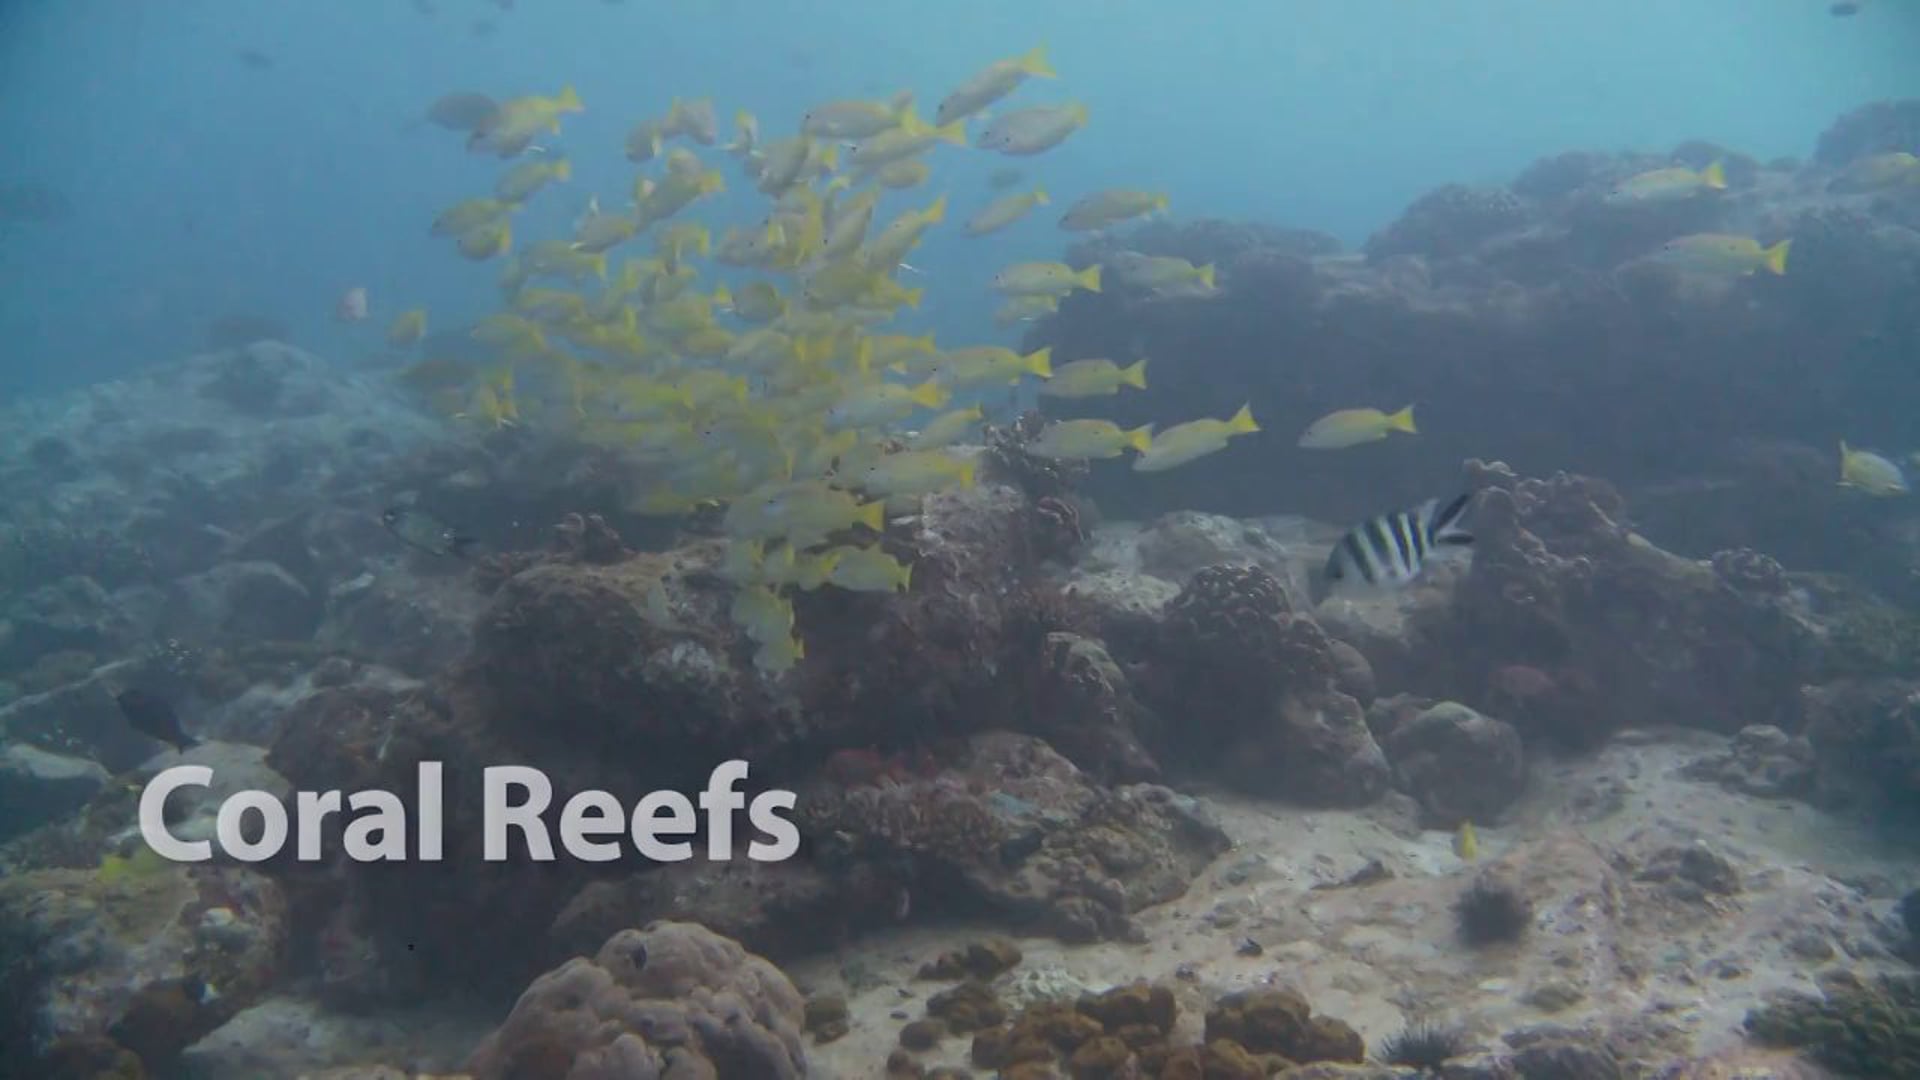 Mitsubishi Global Coral Reef Conservation Project